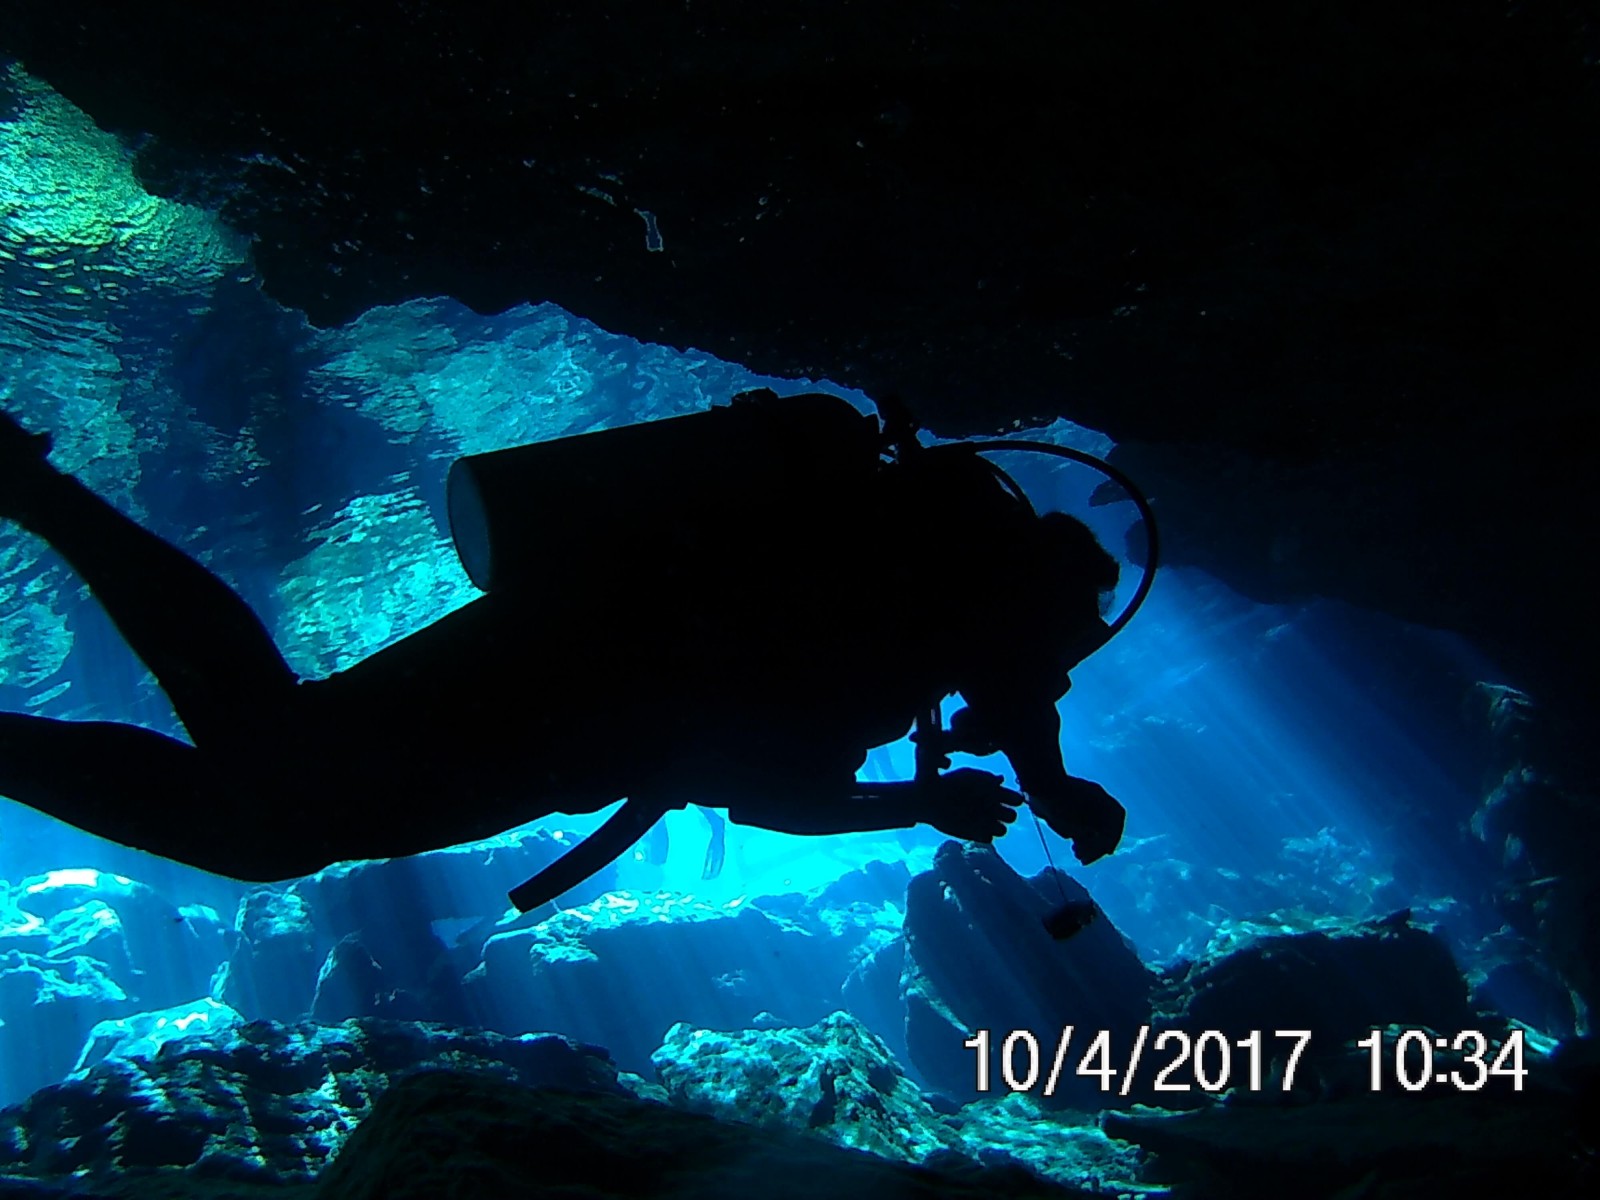 Cenote (cavern) diving off the Yucatan Peninsula near Tulum -- though drift diving off Cozumel may be my favorite. I'm kinda of a fair-weather (Carabbean warm-water) diver.  I don't really mind the cold but I hate getting into tick wetsuits and low-vis :(